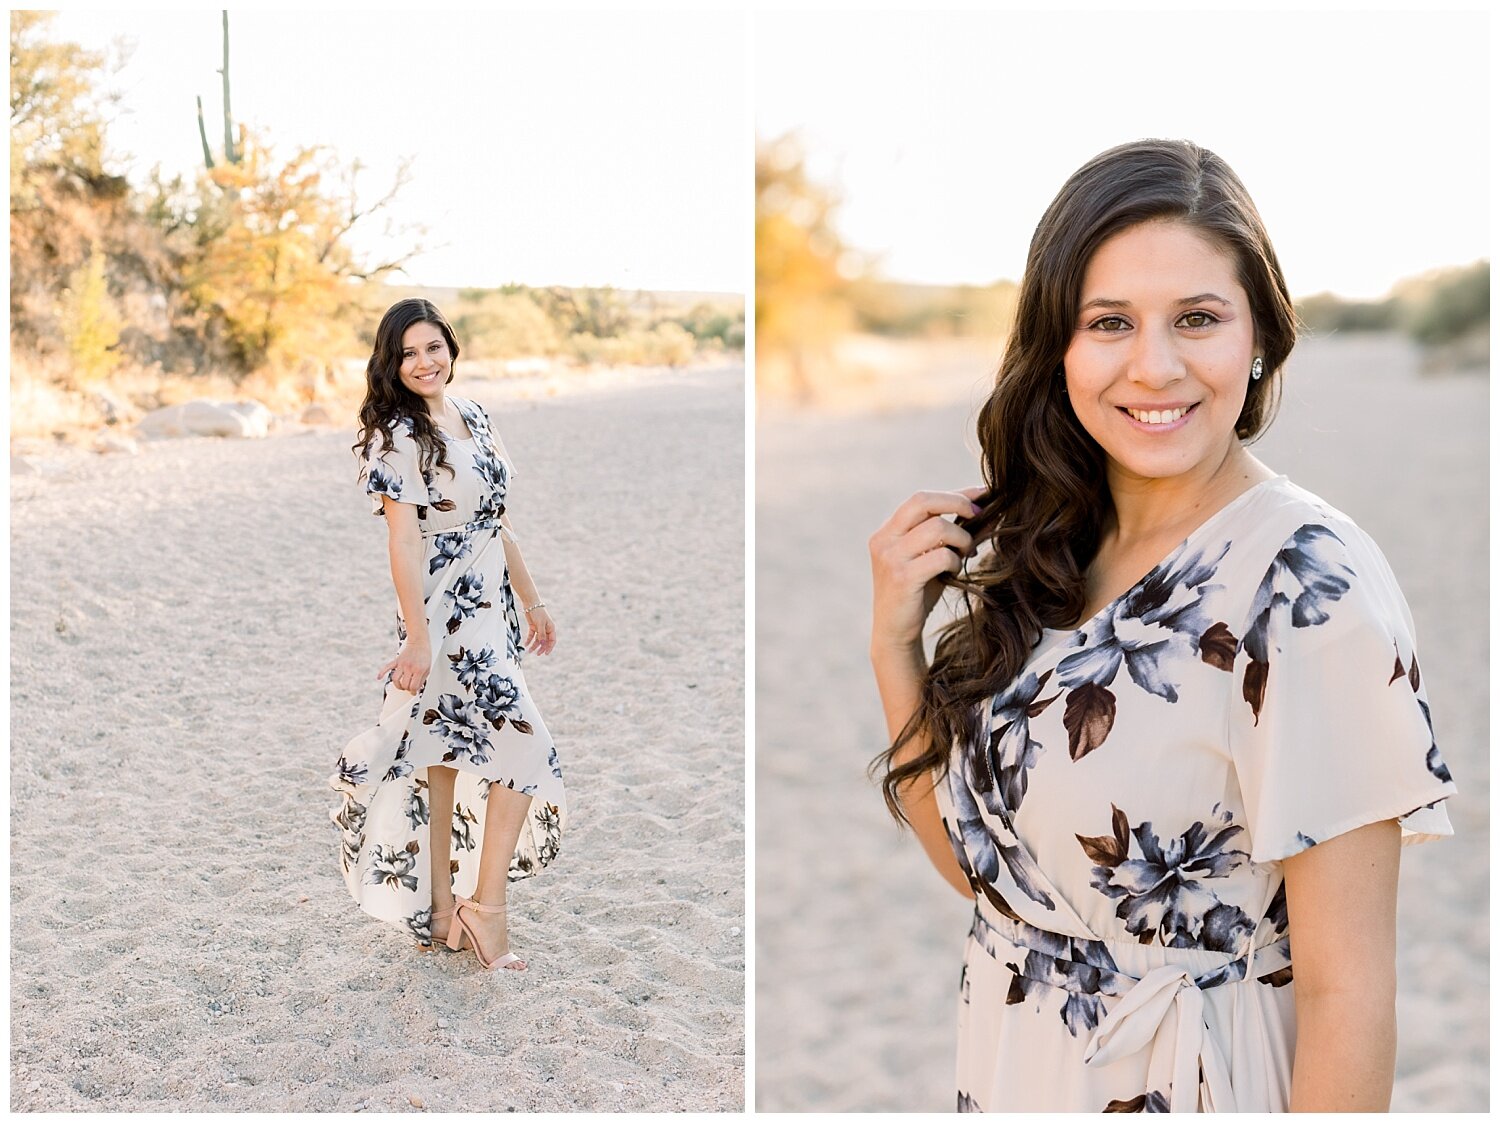 Portraits of Bride-to-be during her engagement session at Catalina State Park. She chose to wear an ivory high-low flowy dress with navy blue floral motif.